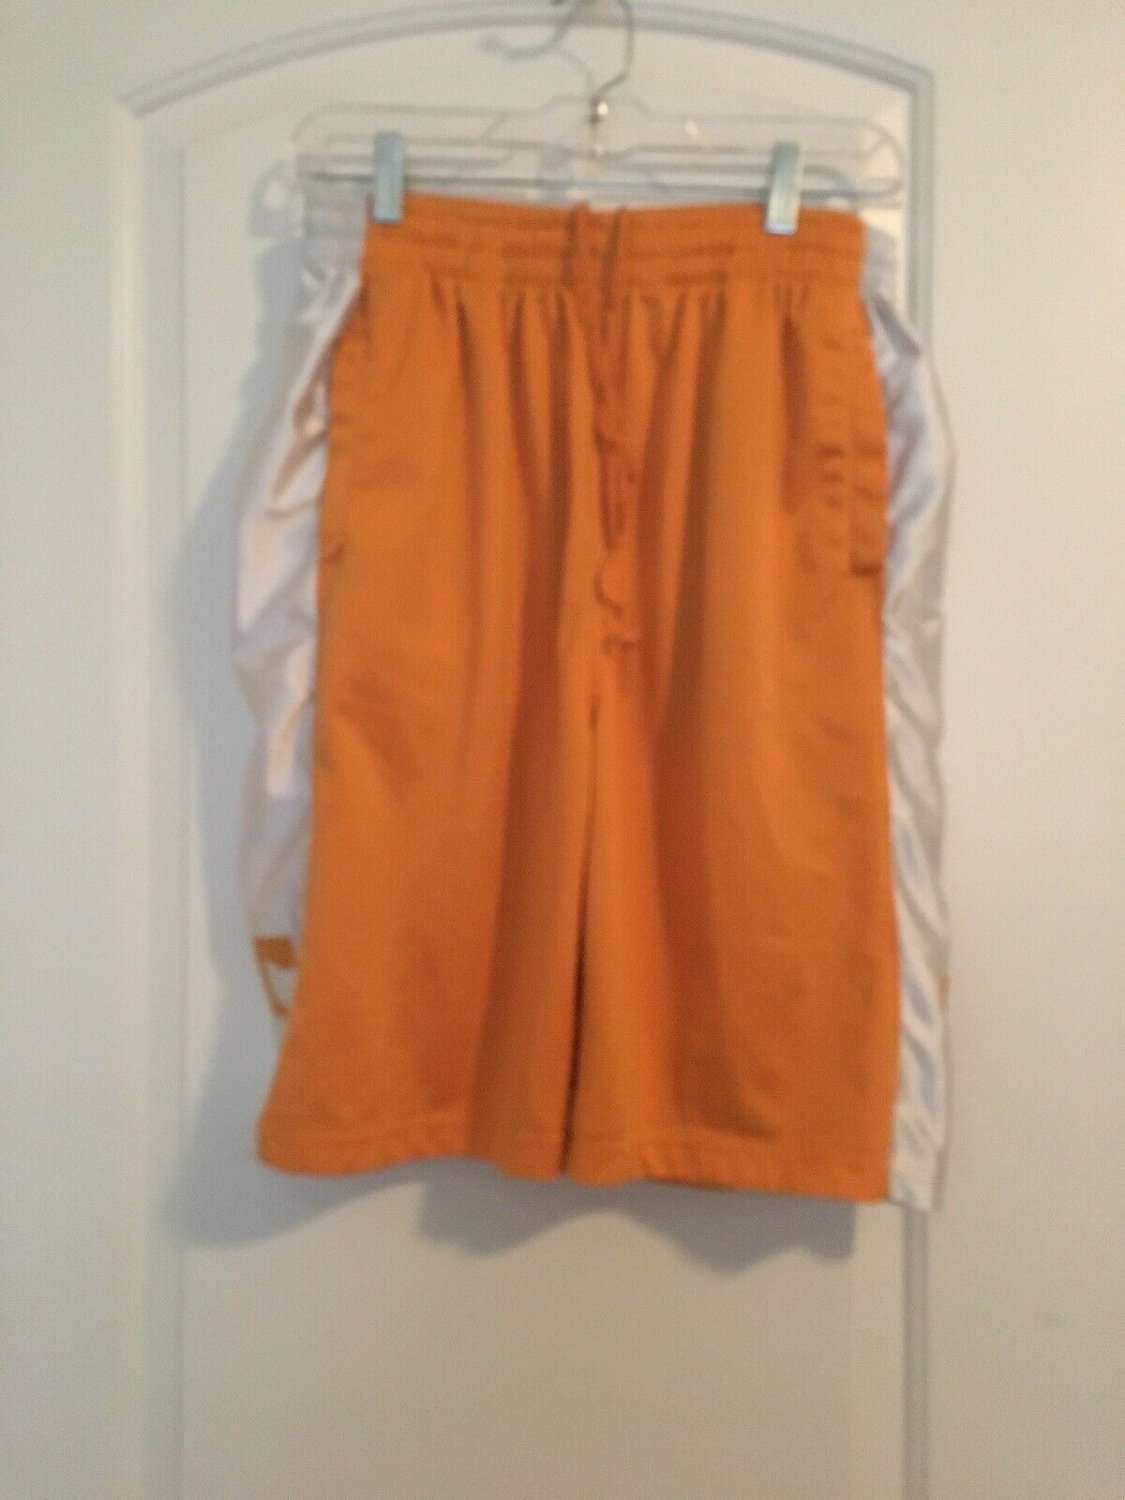 Tennessee Colosseum Men's Lined Athletic Shorts Sz L MultiColor